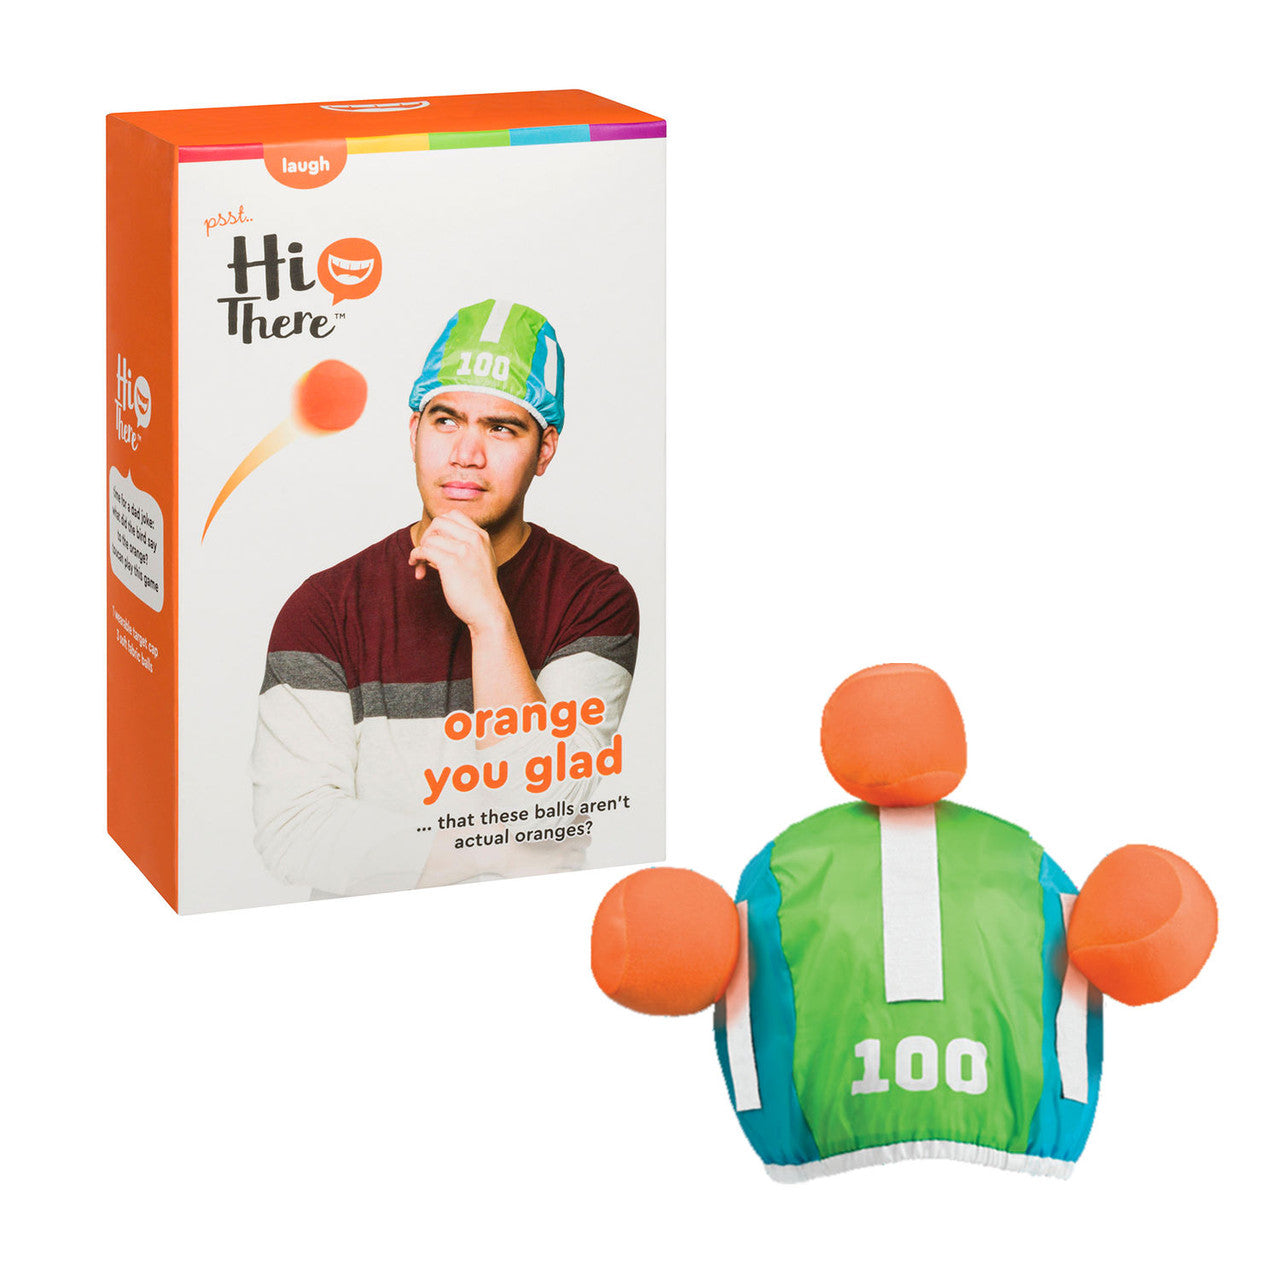 Photo of the “Orange You Glad” Wearable Target Hat, next to its box packaging, on a white background.